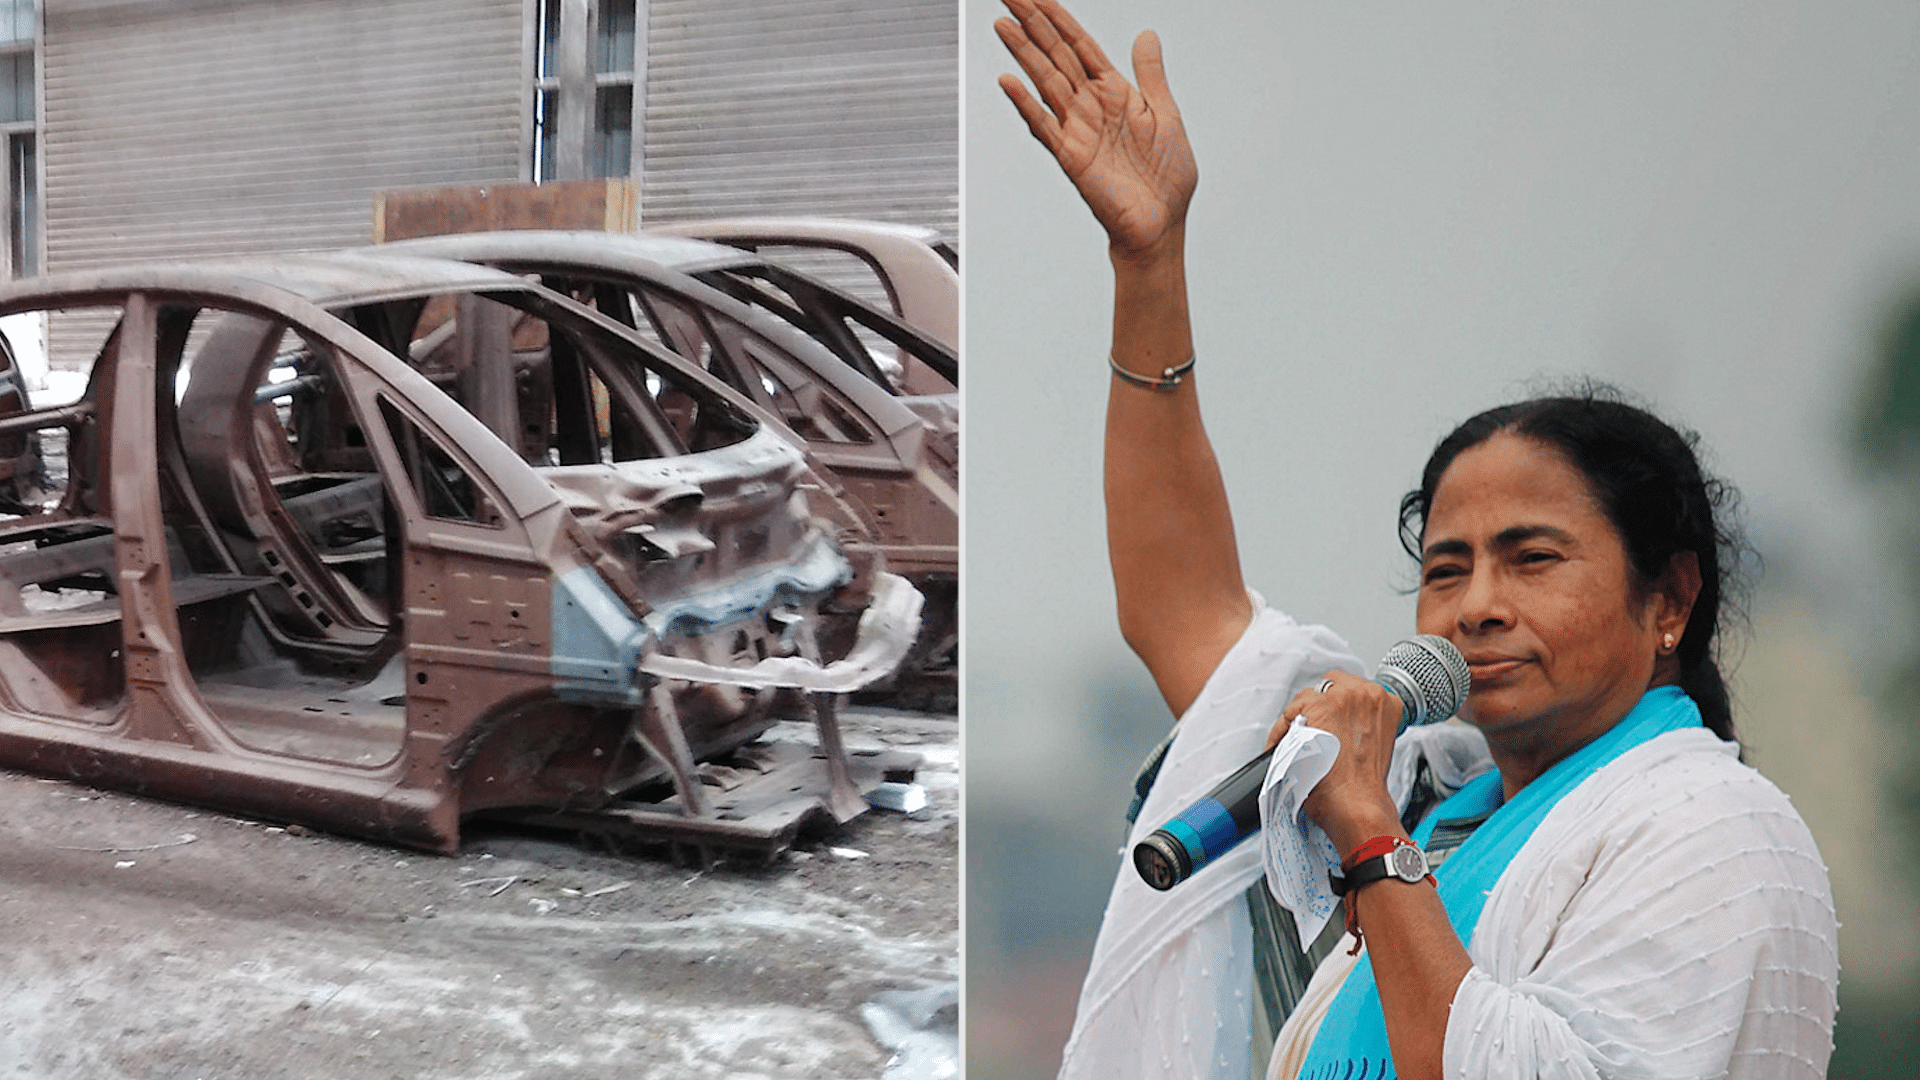 Tata Motors suffer setback after Supreme Court verdict, Mamata Banerjee expresses joy (Photo: Altered by The Quint)